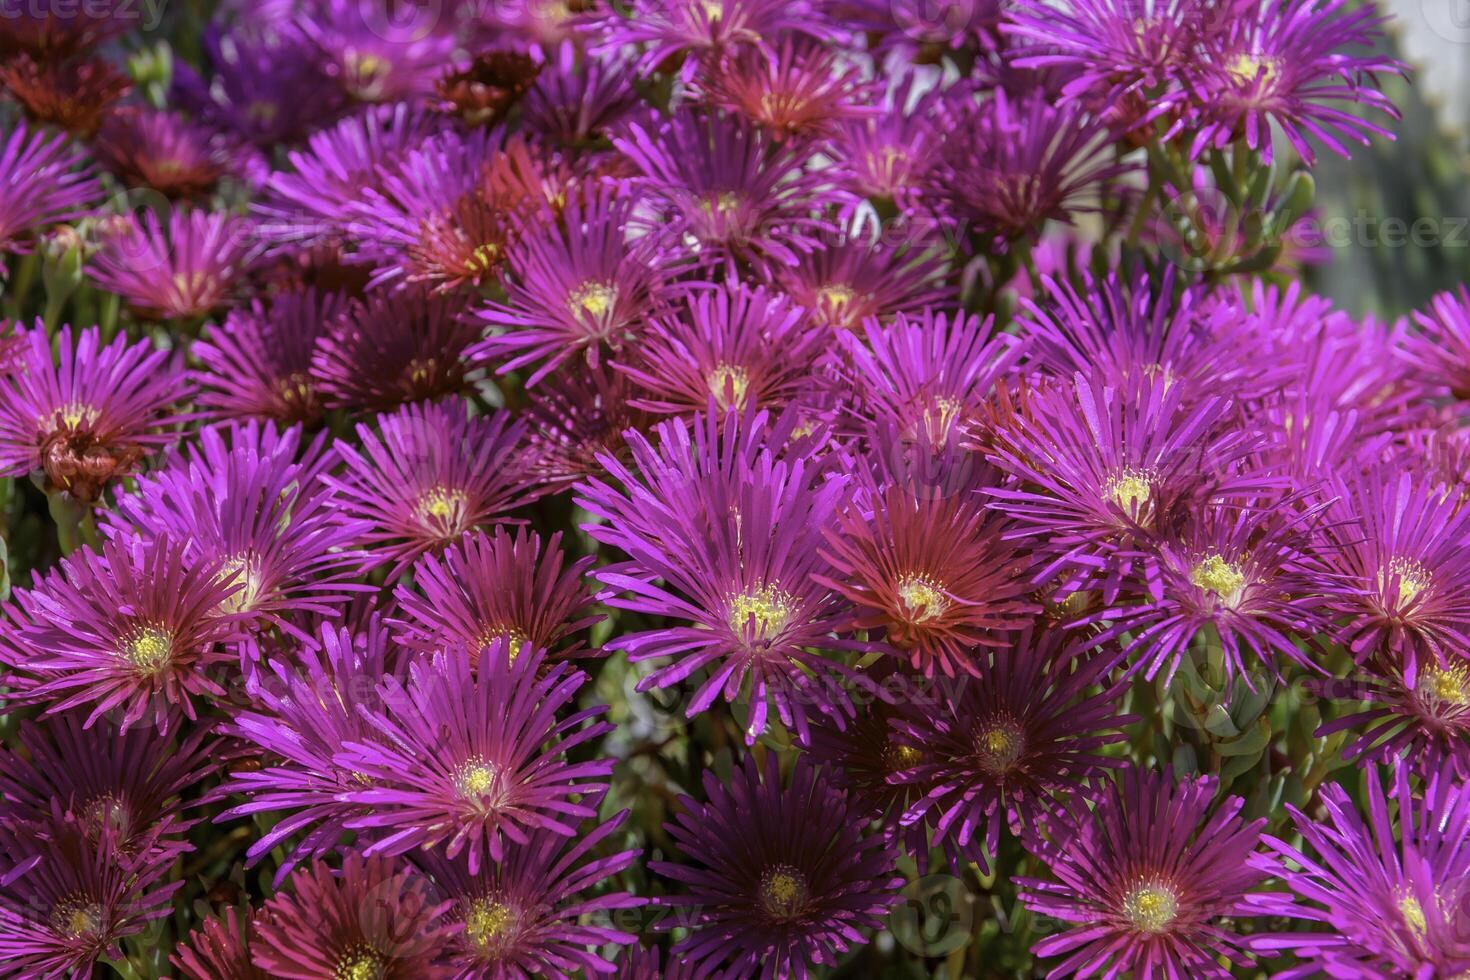 Vibrant pink flowers, likely from the genus Lampranthus, commonly known as ice plants photo